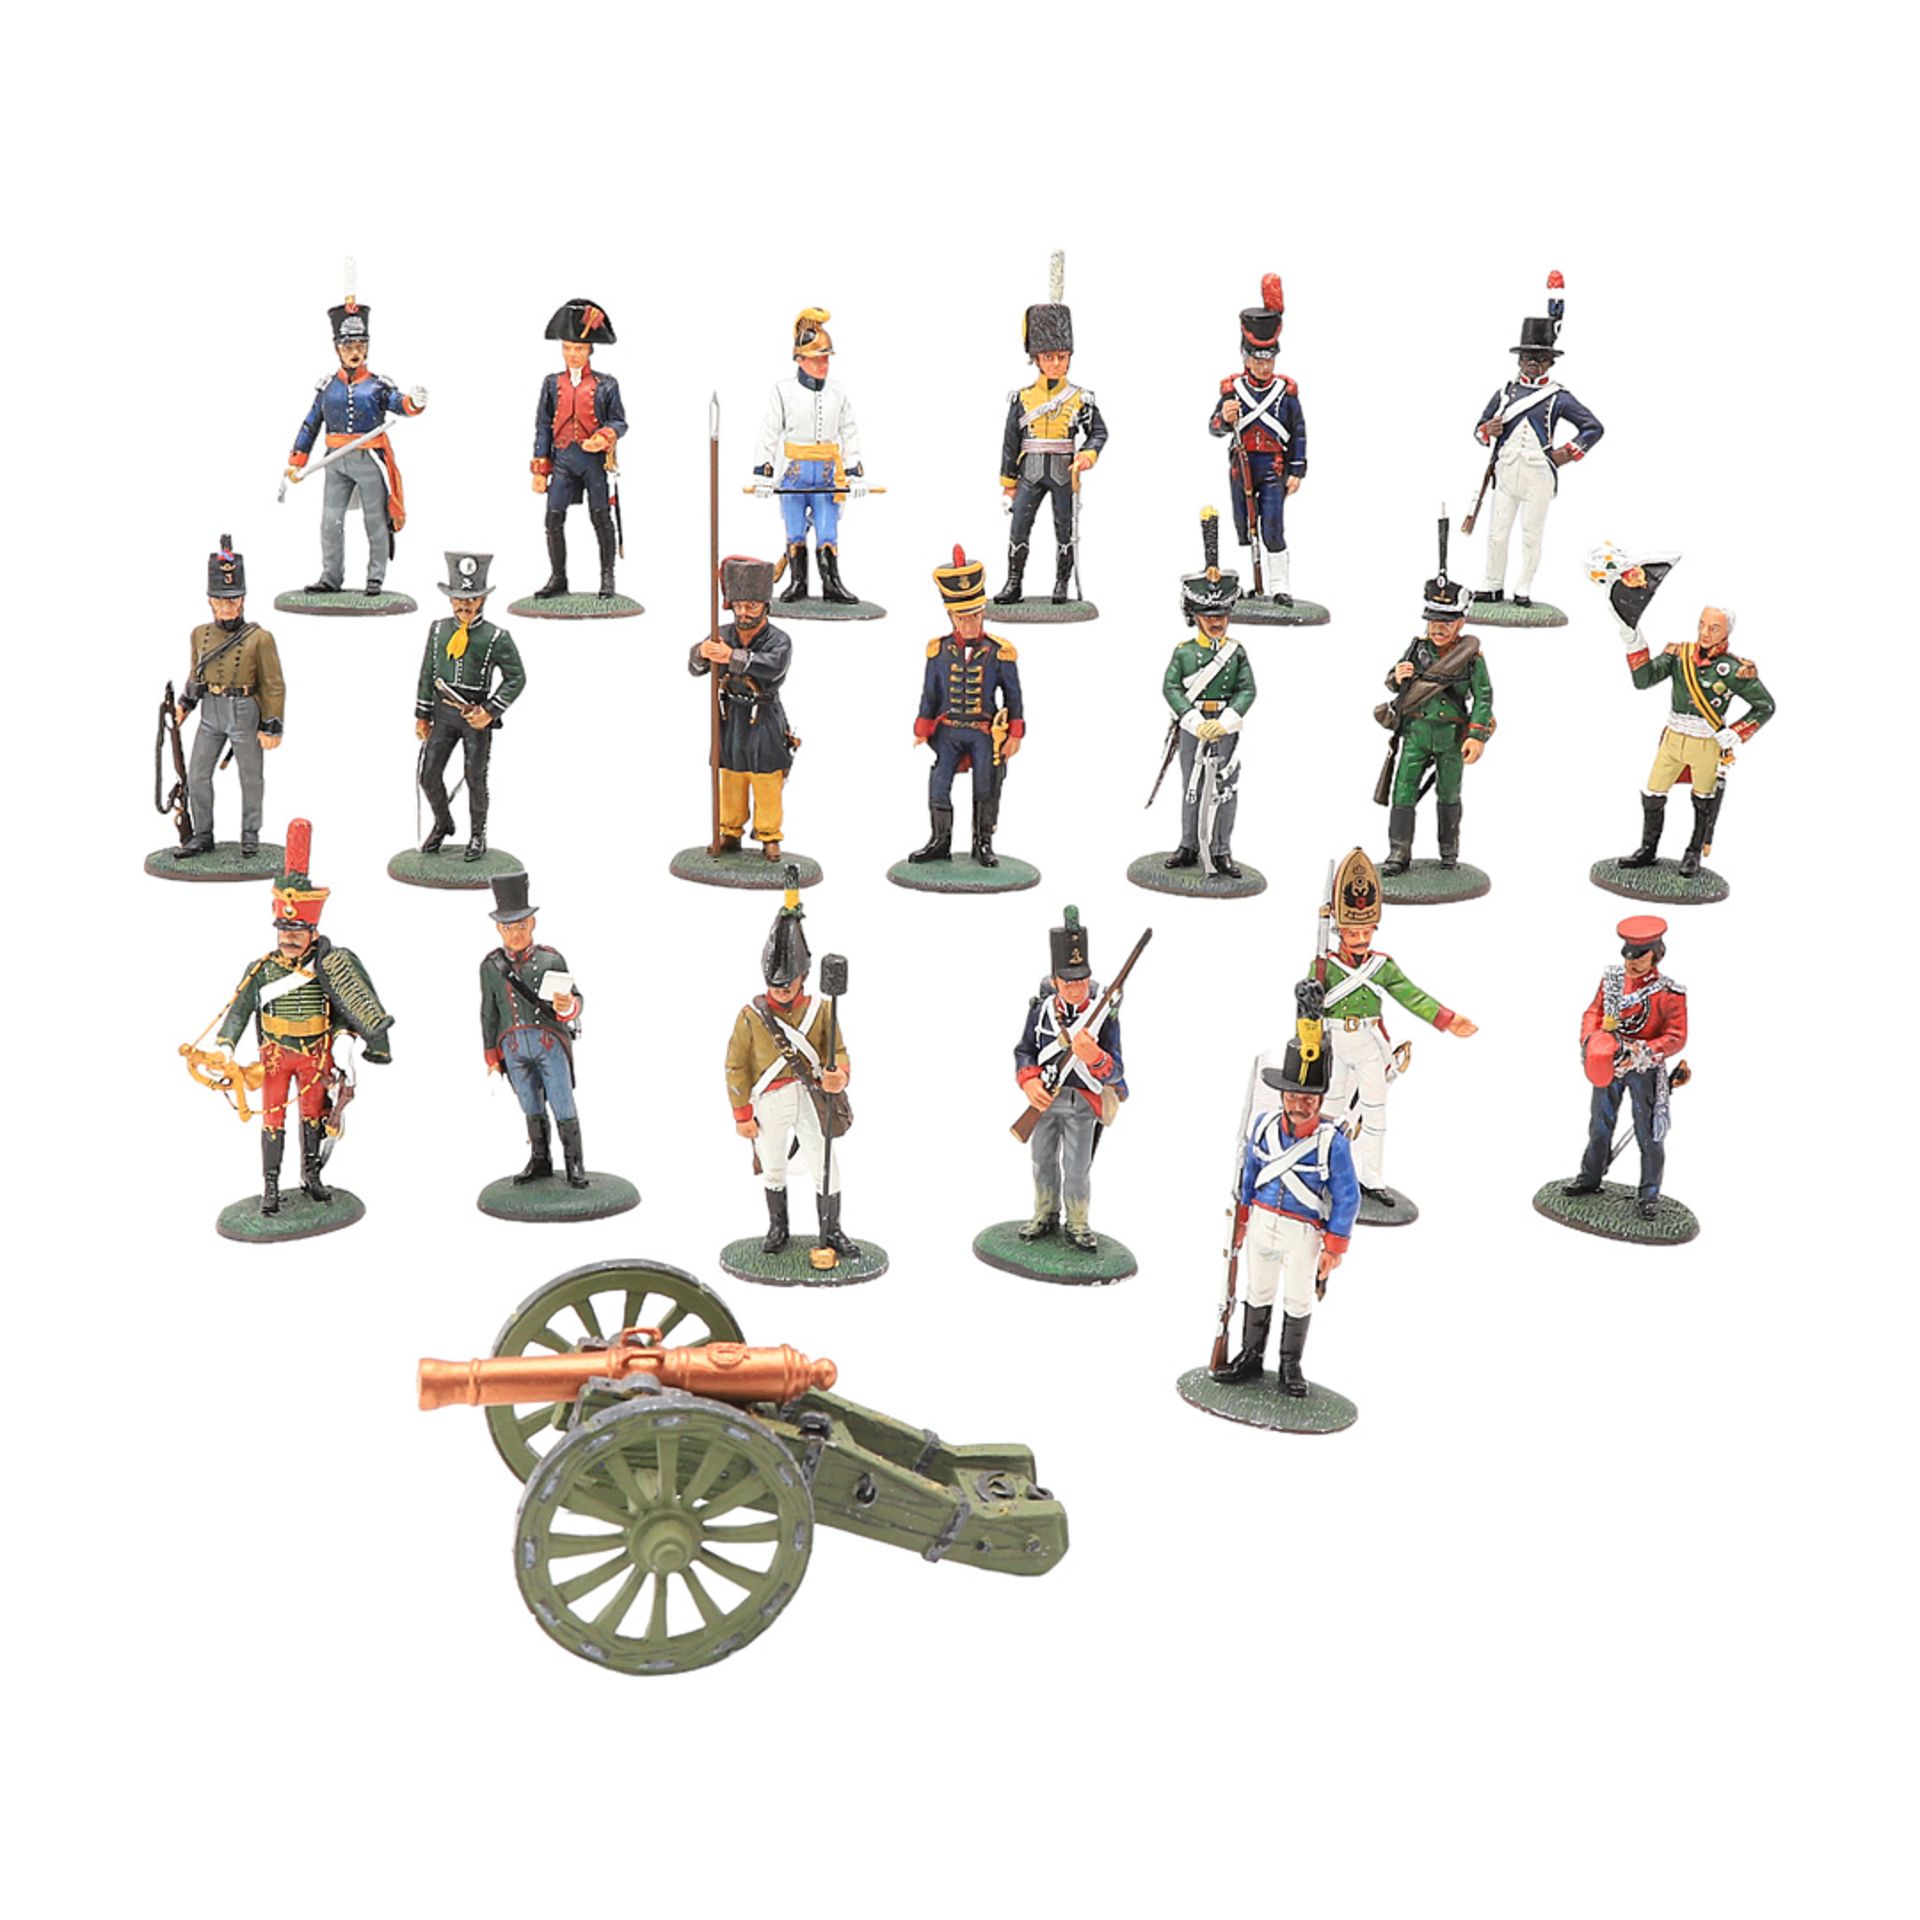 20 miniature figures of Allied soldiers and cannon, wars of liberation / battle of nations